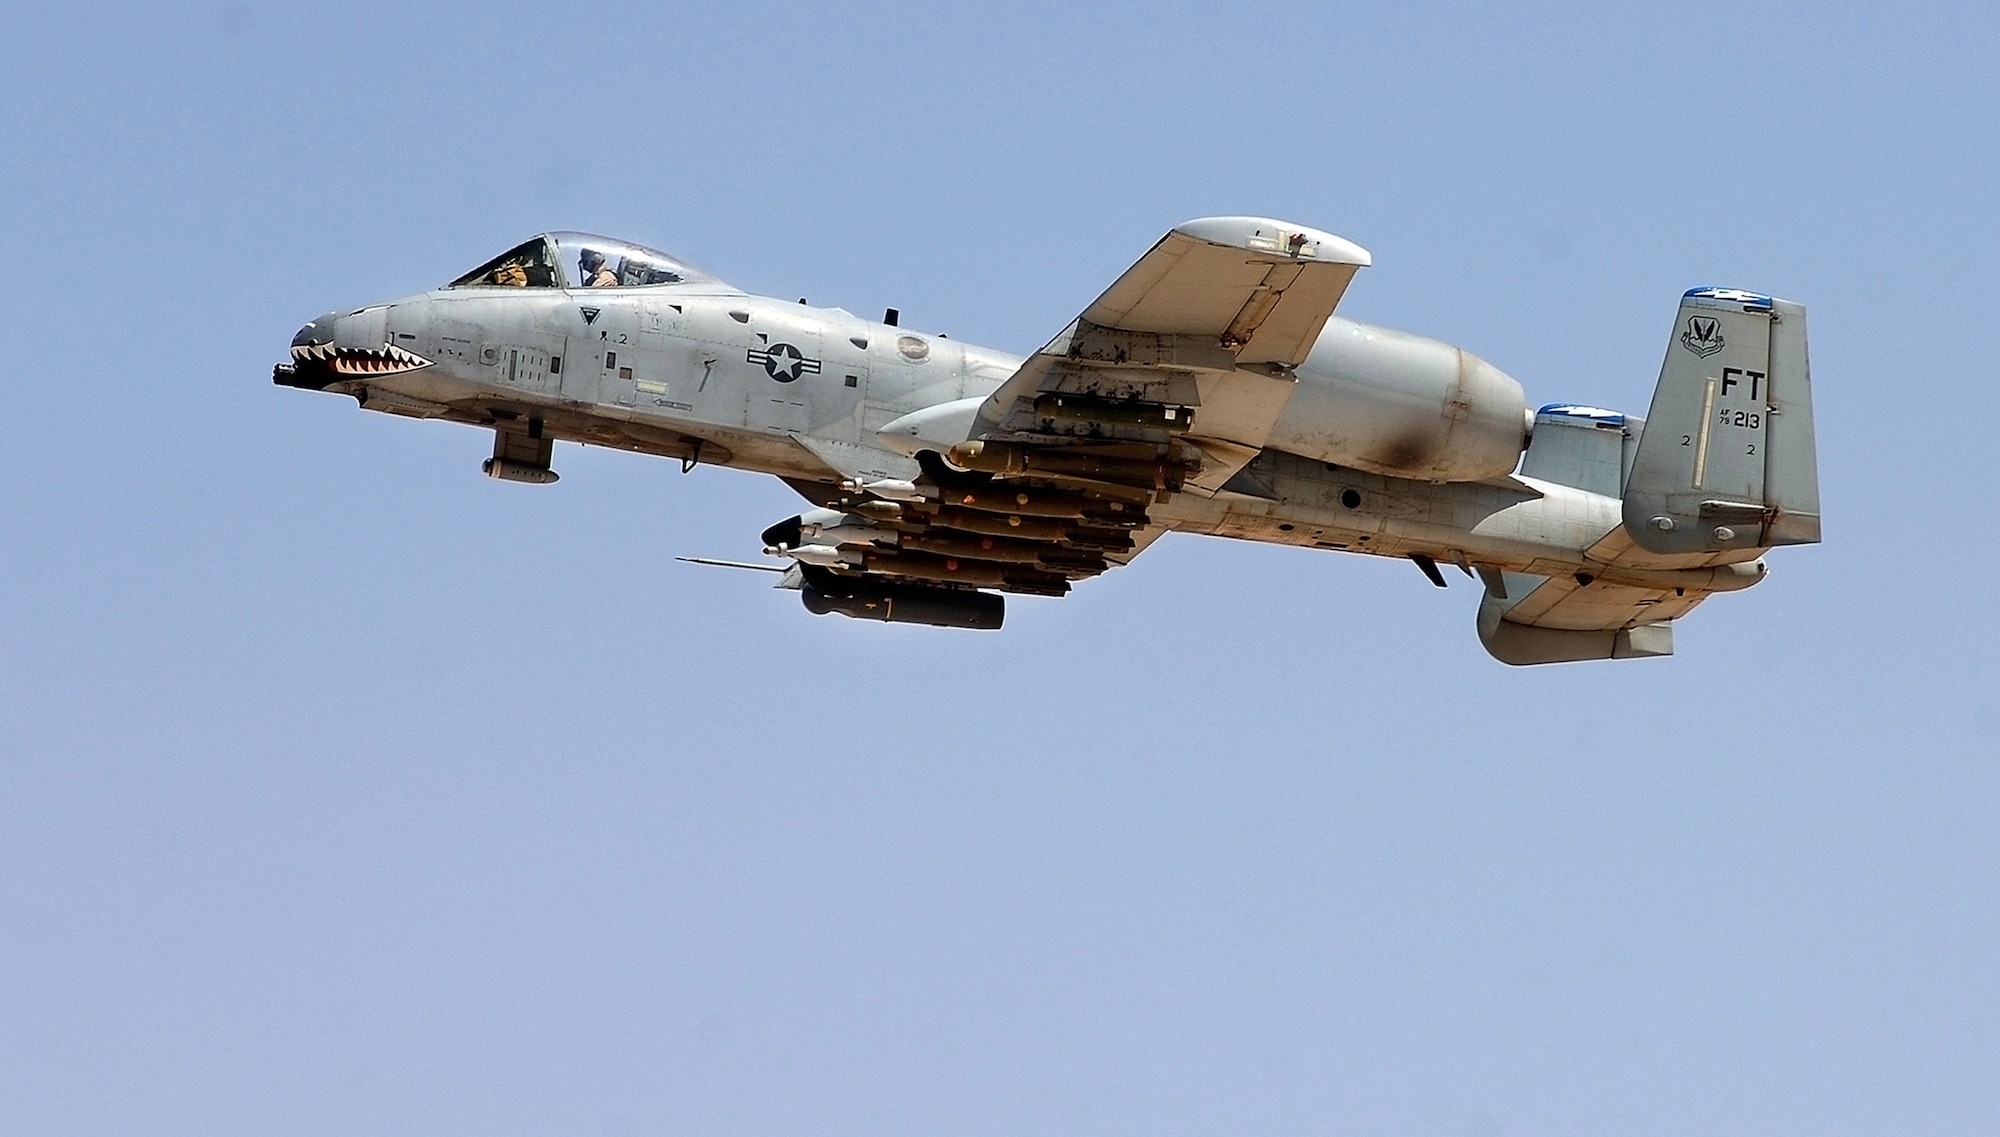 An A-10 Thunderbolt II takes off to provide close-air support to ground troops in Iraq April 25 from Al Asad Air Base, Iraq. The 438th Air Expeditionary Group A-10s perform 10 sorties daily, with 900 sorties in this last four months. (U.S. Air Force photo/Tech. Sgt. Cecilio M. Ricardo Jr.)